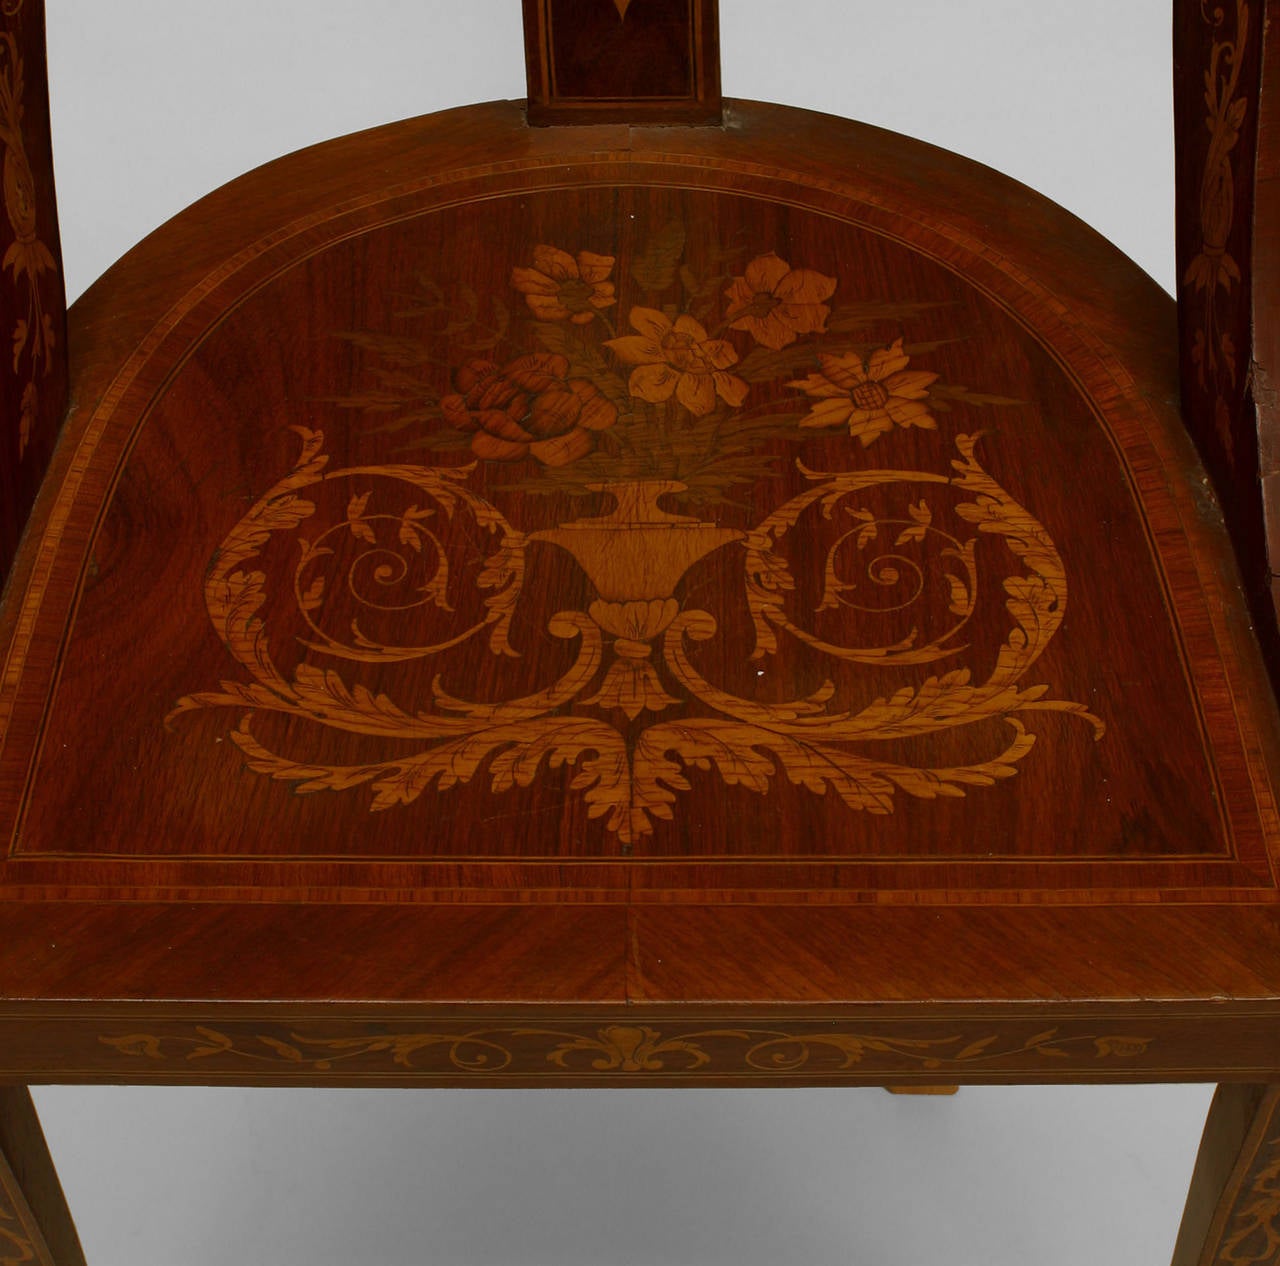 Pair of English Edwardian side chairs with faded mahogany veneer and satinwood inlaid Neo-classical designs on seat and back
